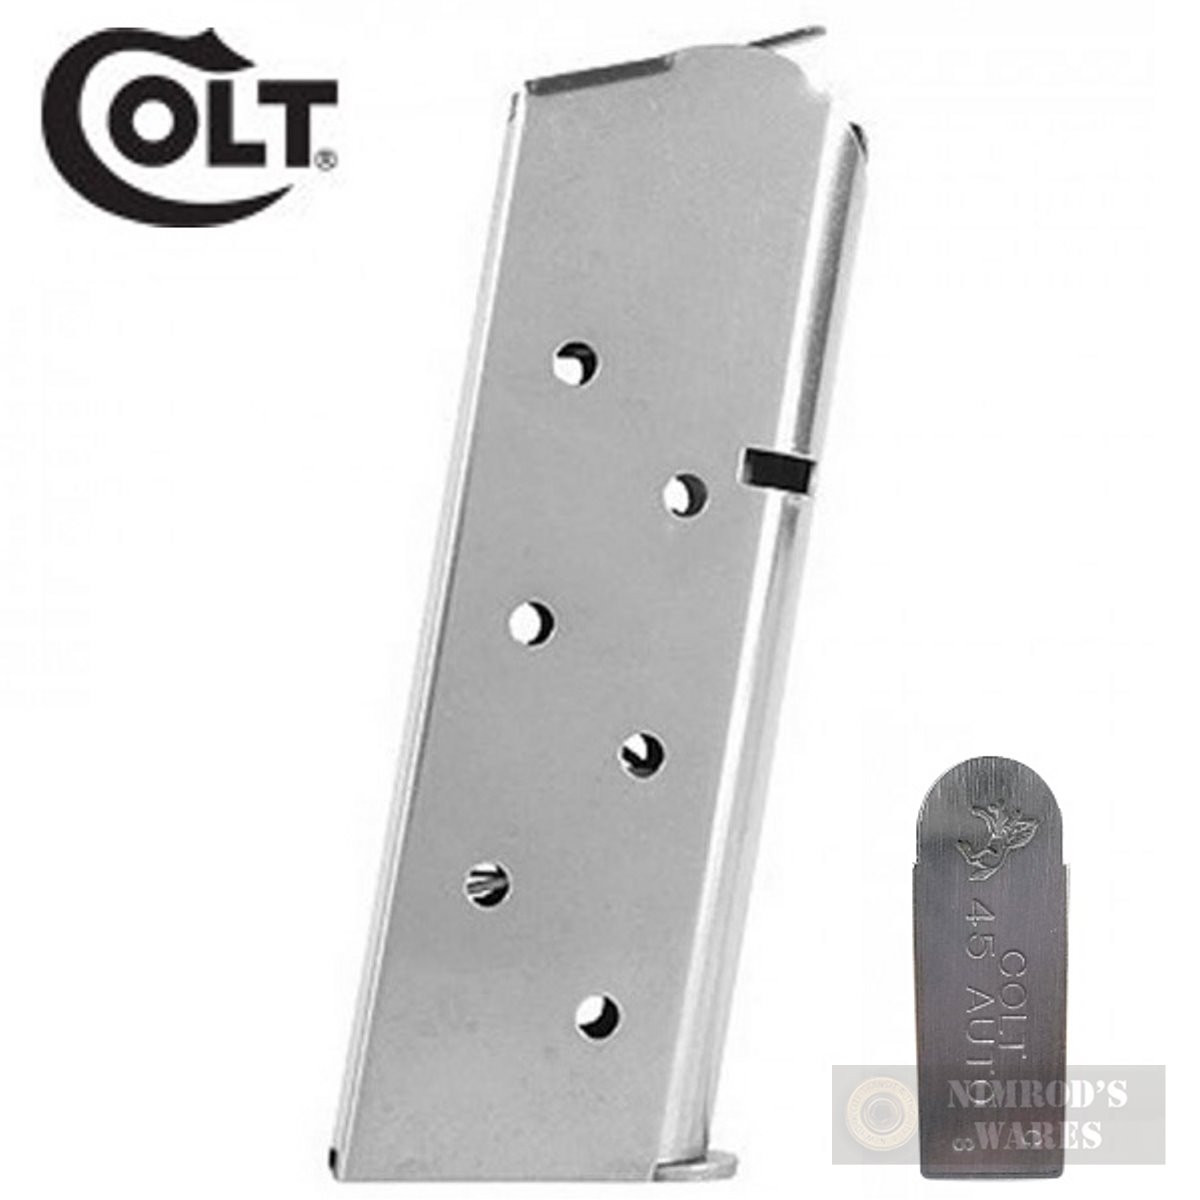 Colt SP579991 7rd Two Factory Magazine for sale online 